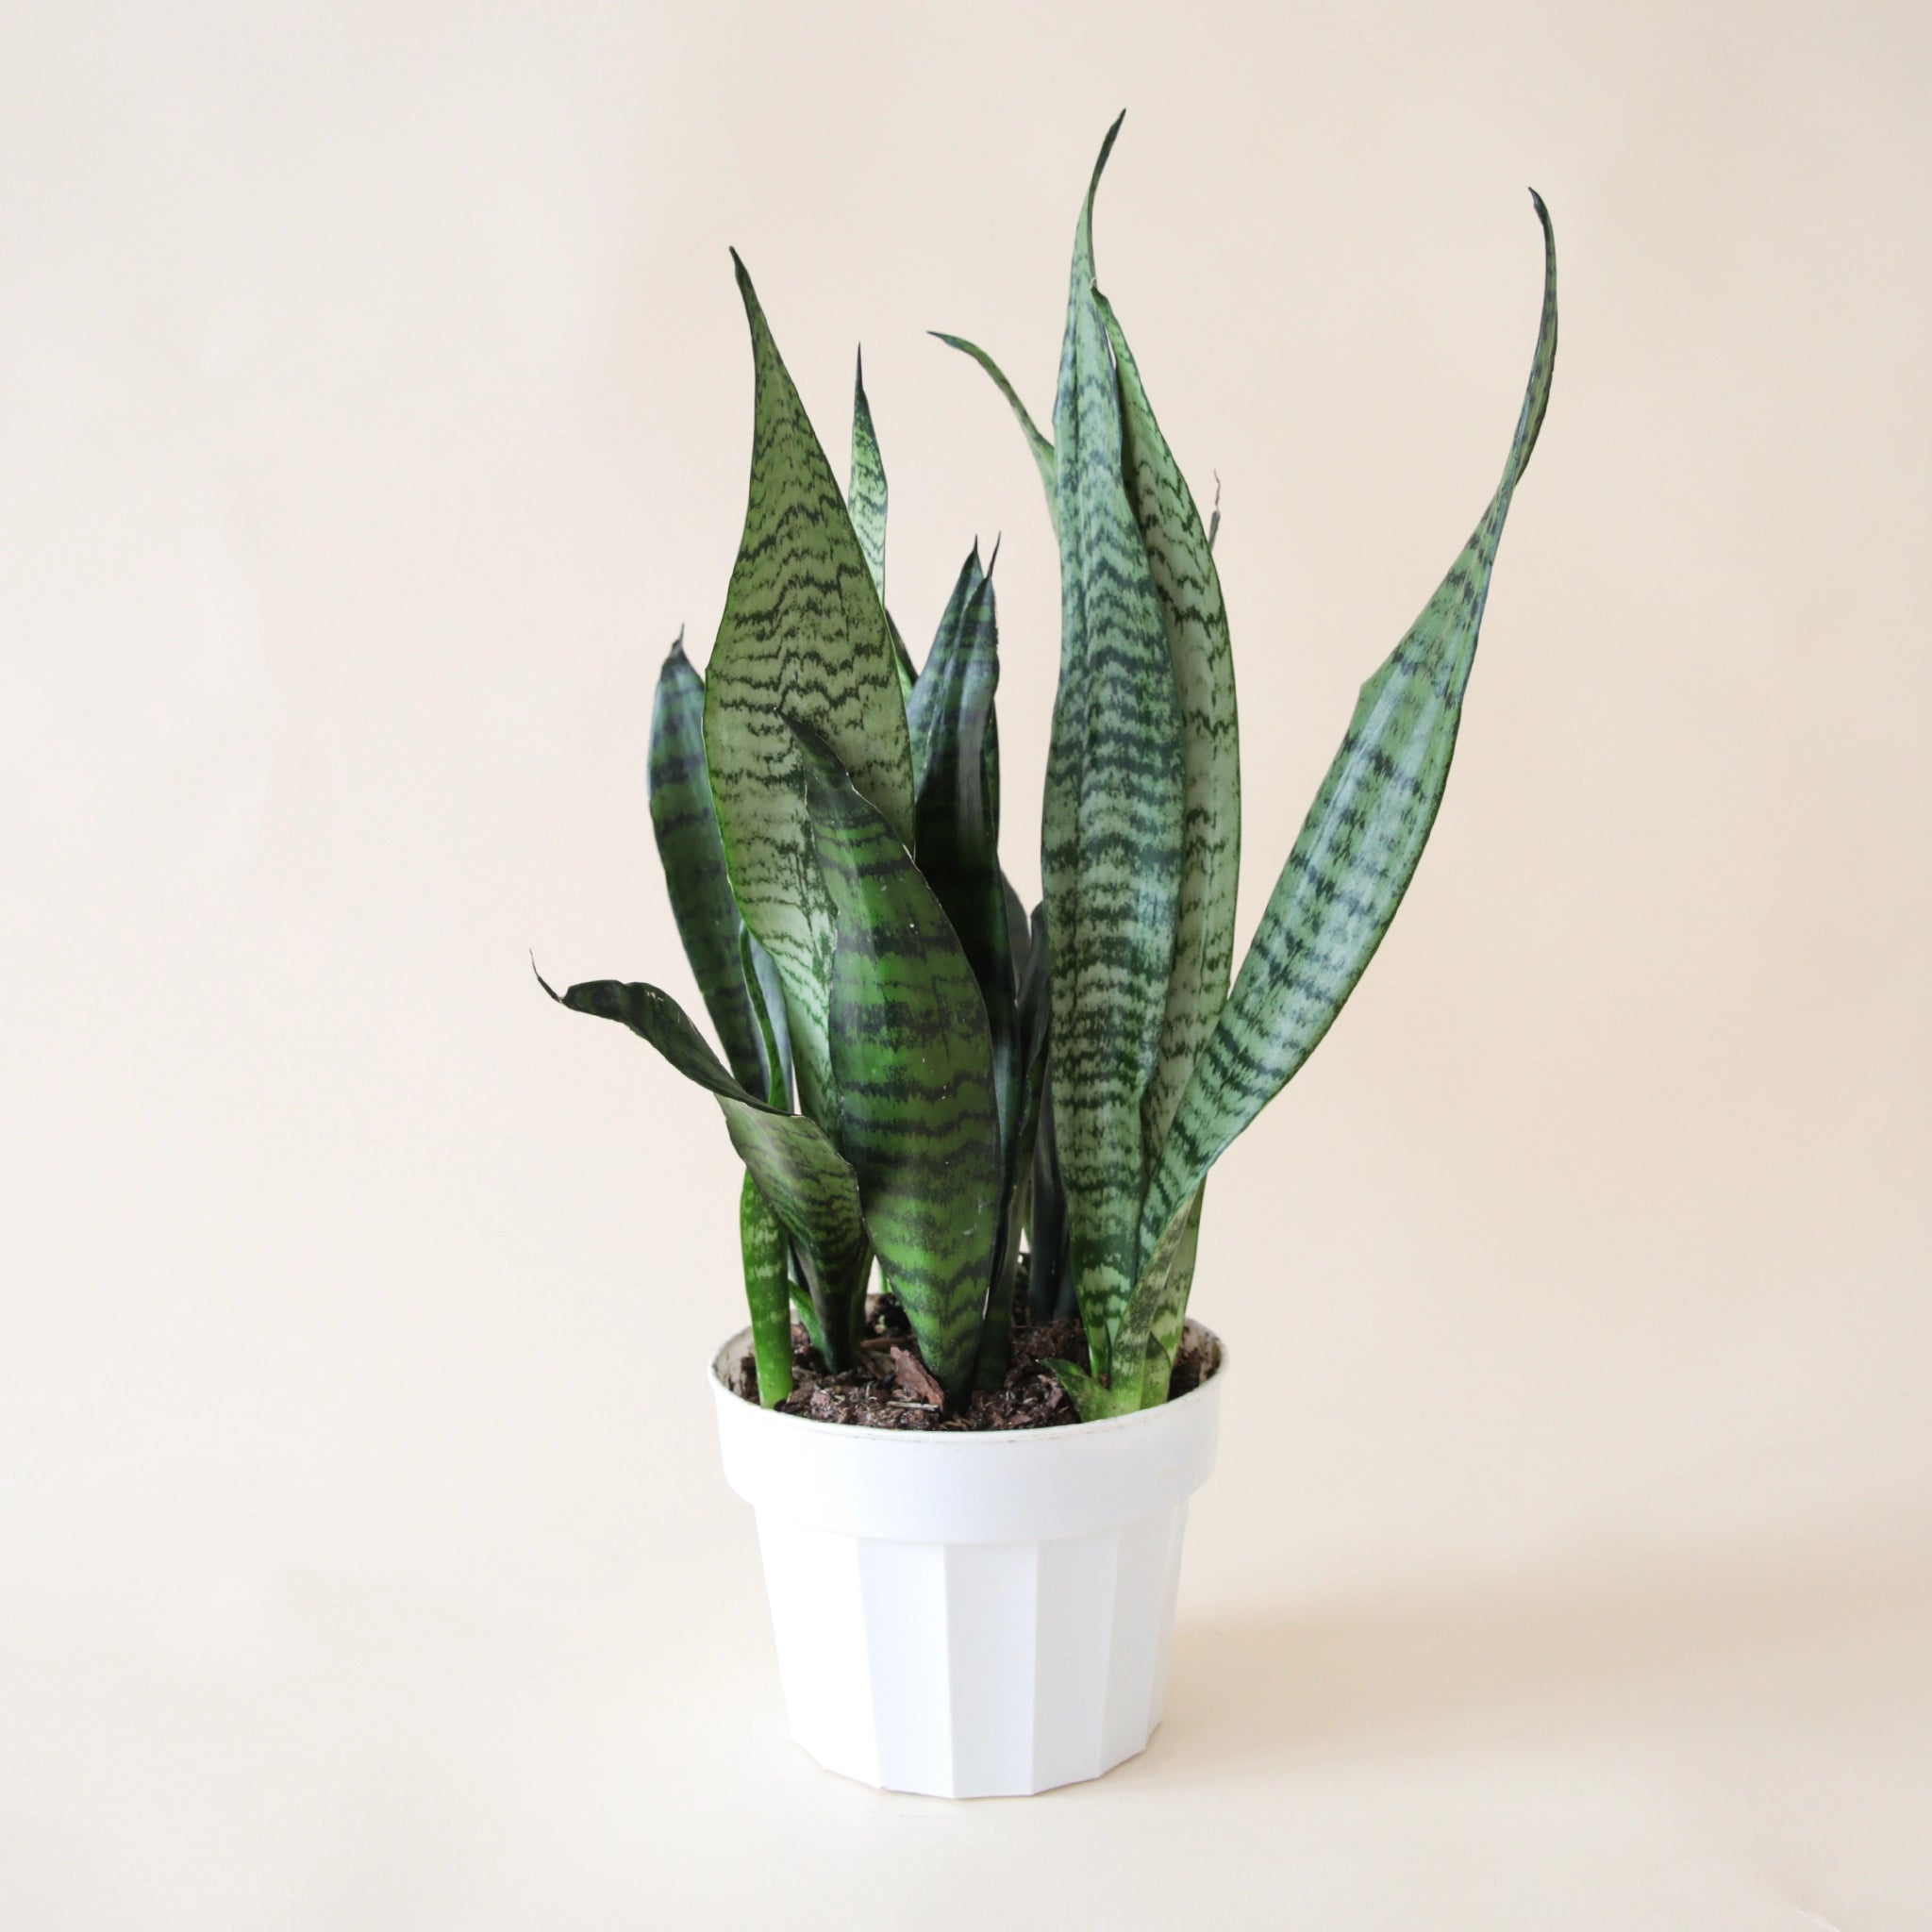 n front of white background is a round white pot with a sansevieria inside. The plant has very tall, stiff leaves that are pointed at the top. The leaves are dark green with light green stripes and patterns.